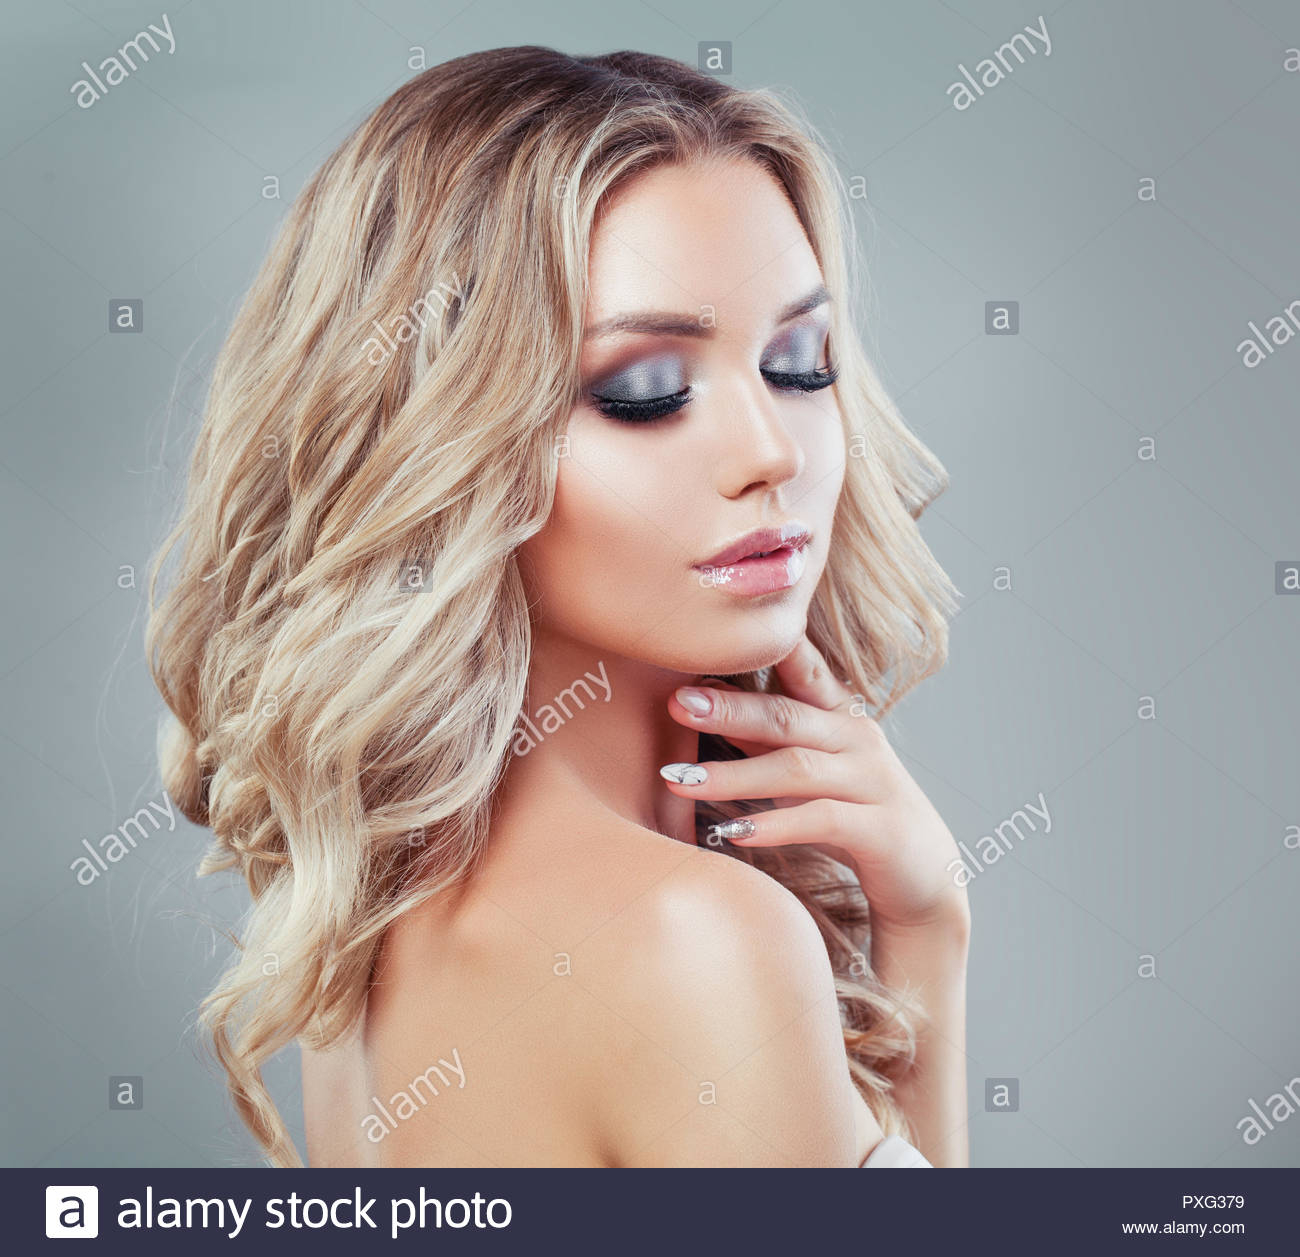 Makeup For Blue Eyes Blonde Hair Young Blonde Woman With Long Curly Hair And Makeup Eyes Closed